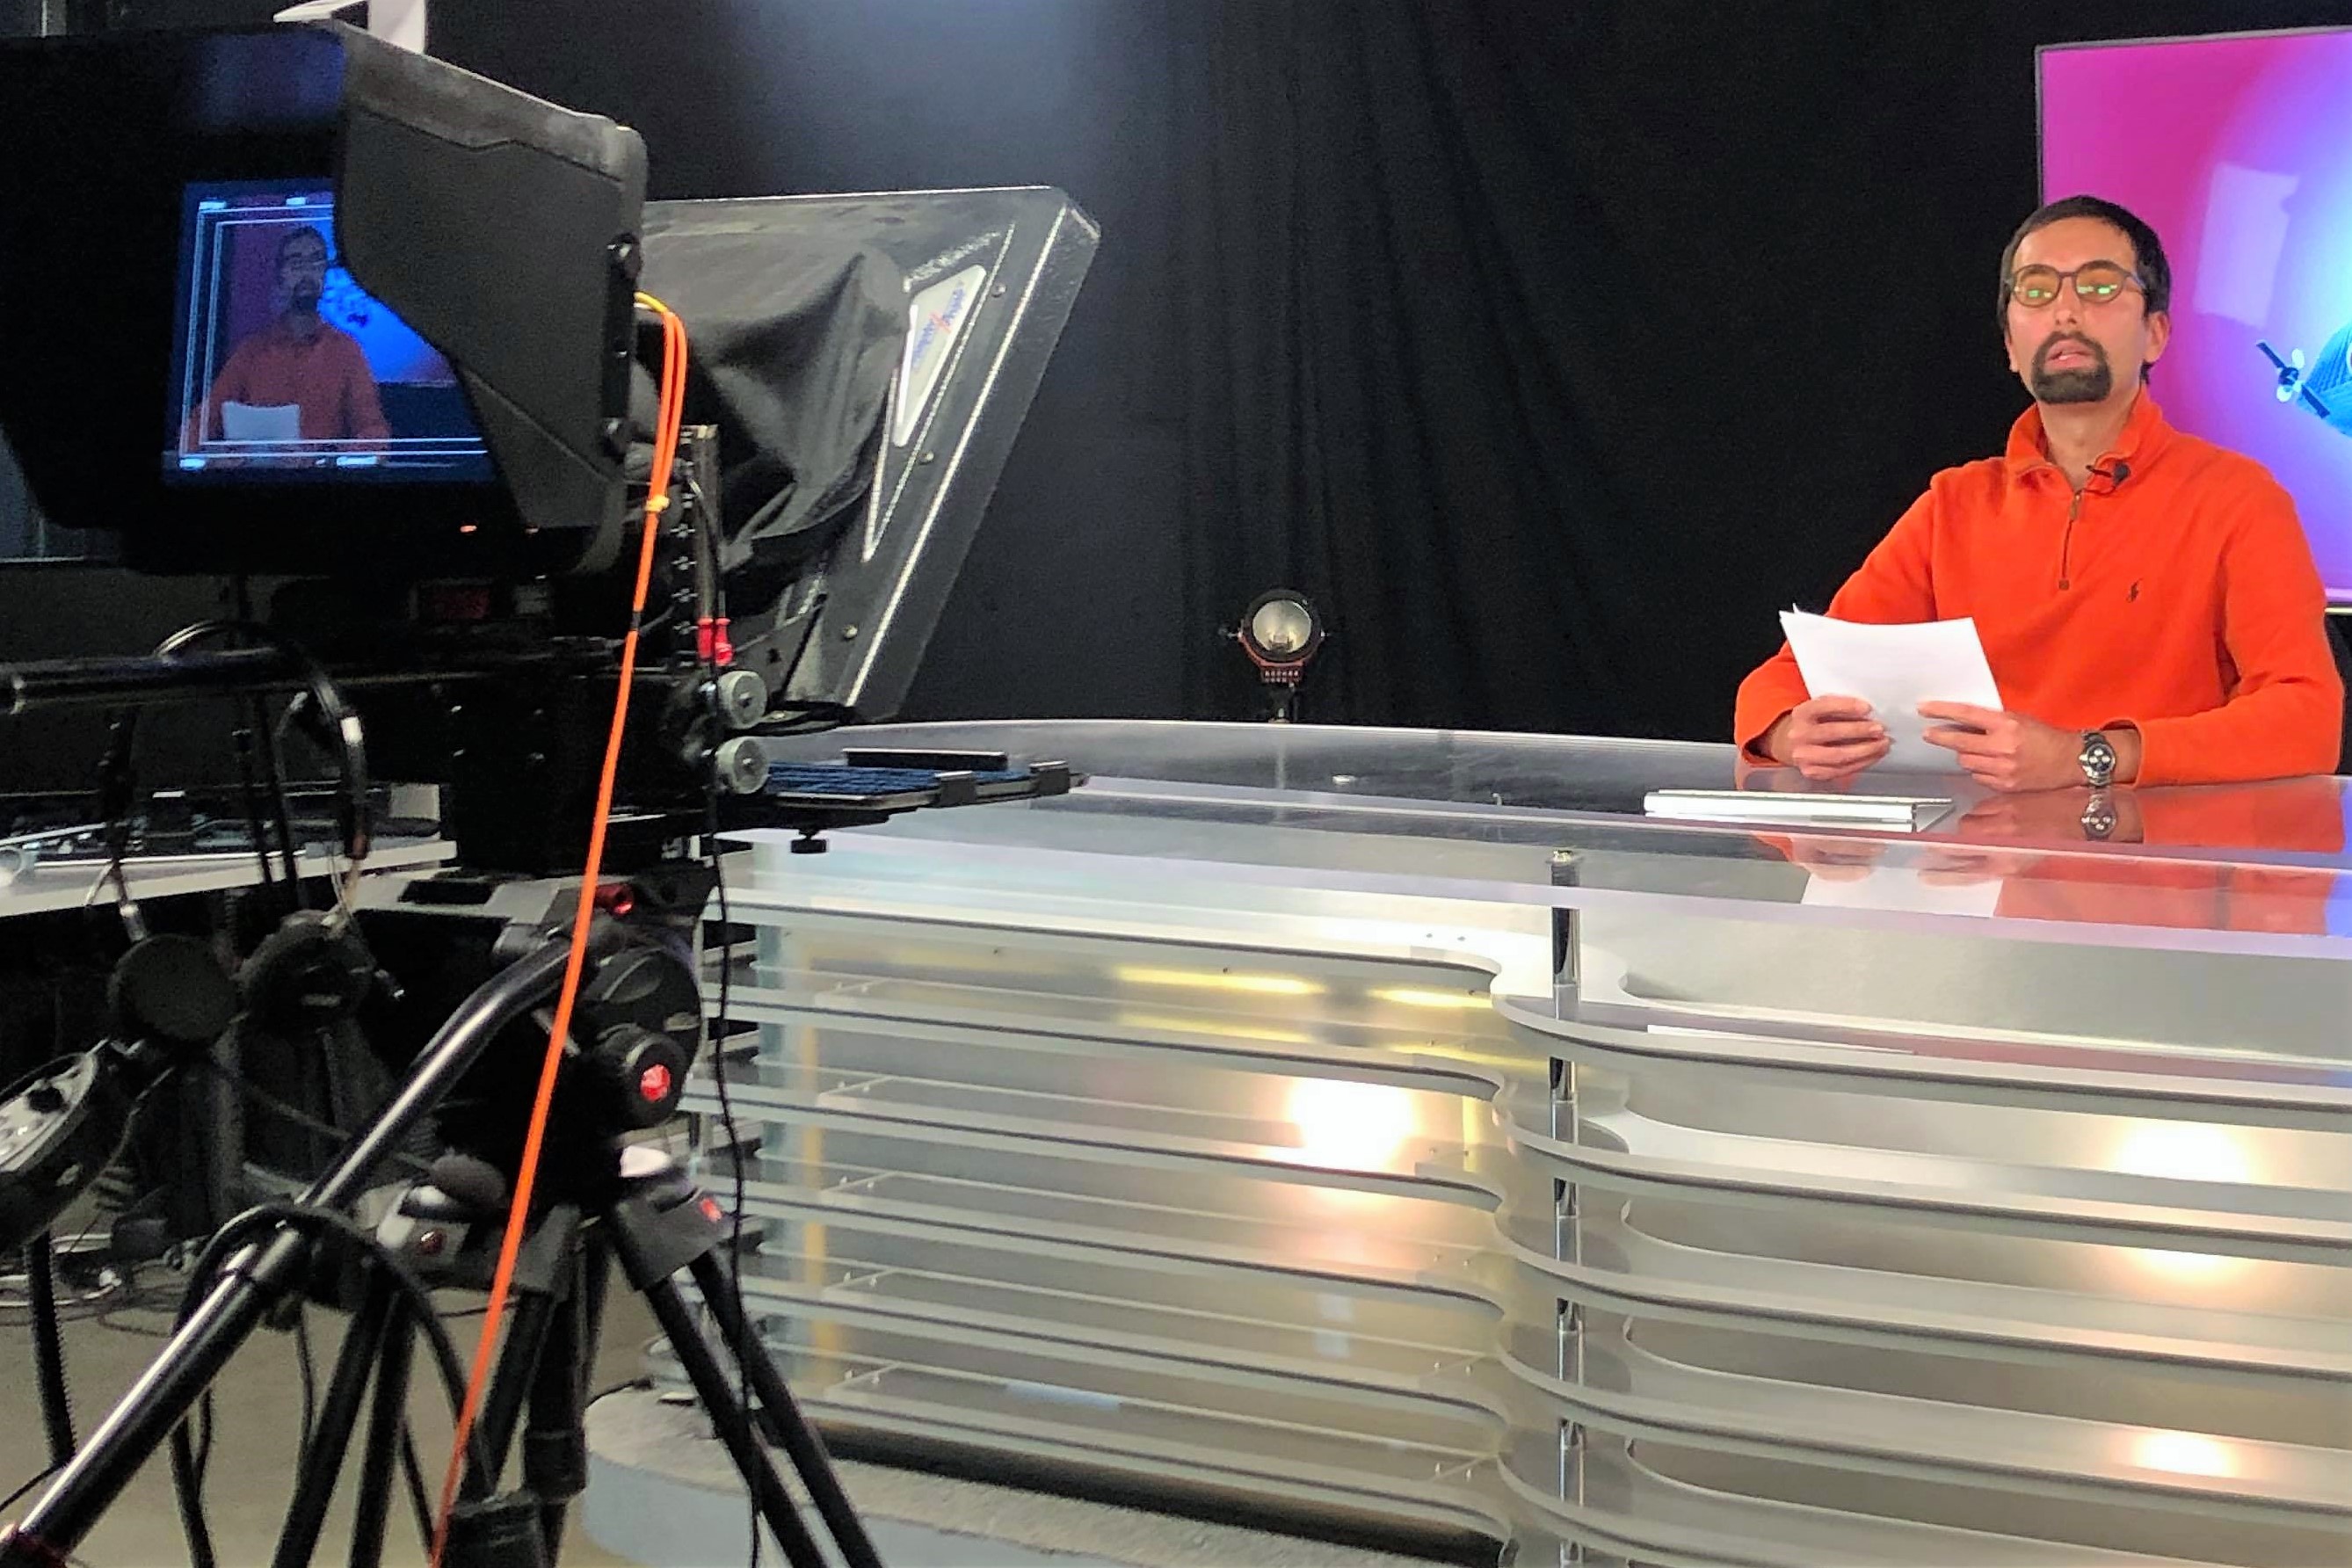 Photograph shows Abbas Mehrabian anchoring a TV newscast at Concordia TV studio in December 2020.